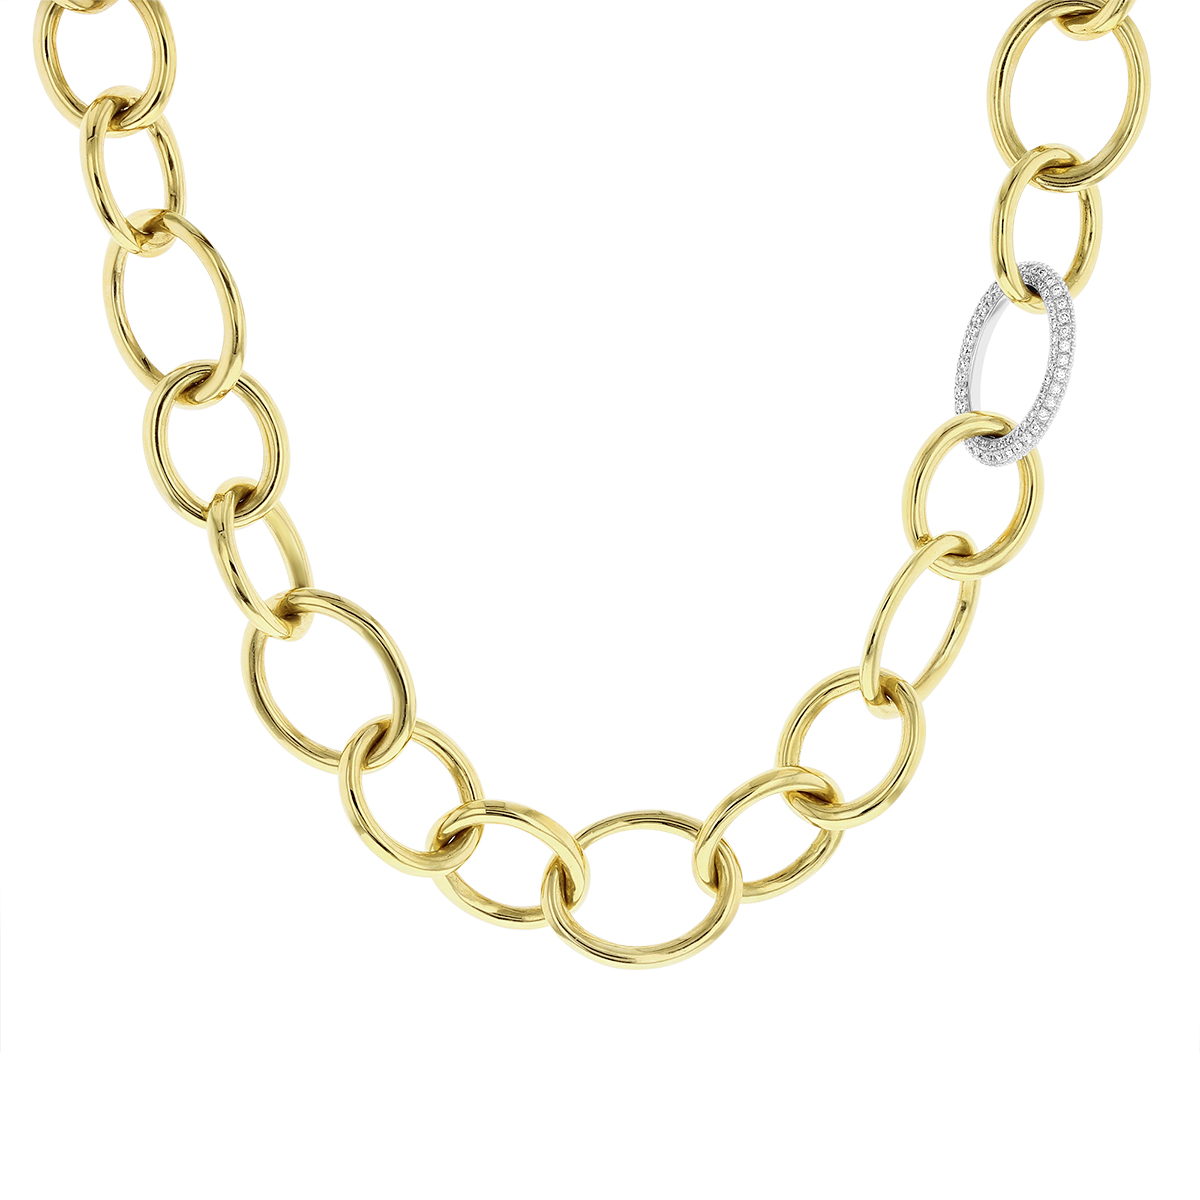 Yellow Gold Link Chain Necklace with Diamond Link, 18